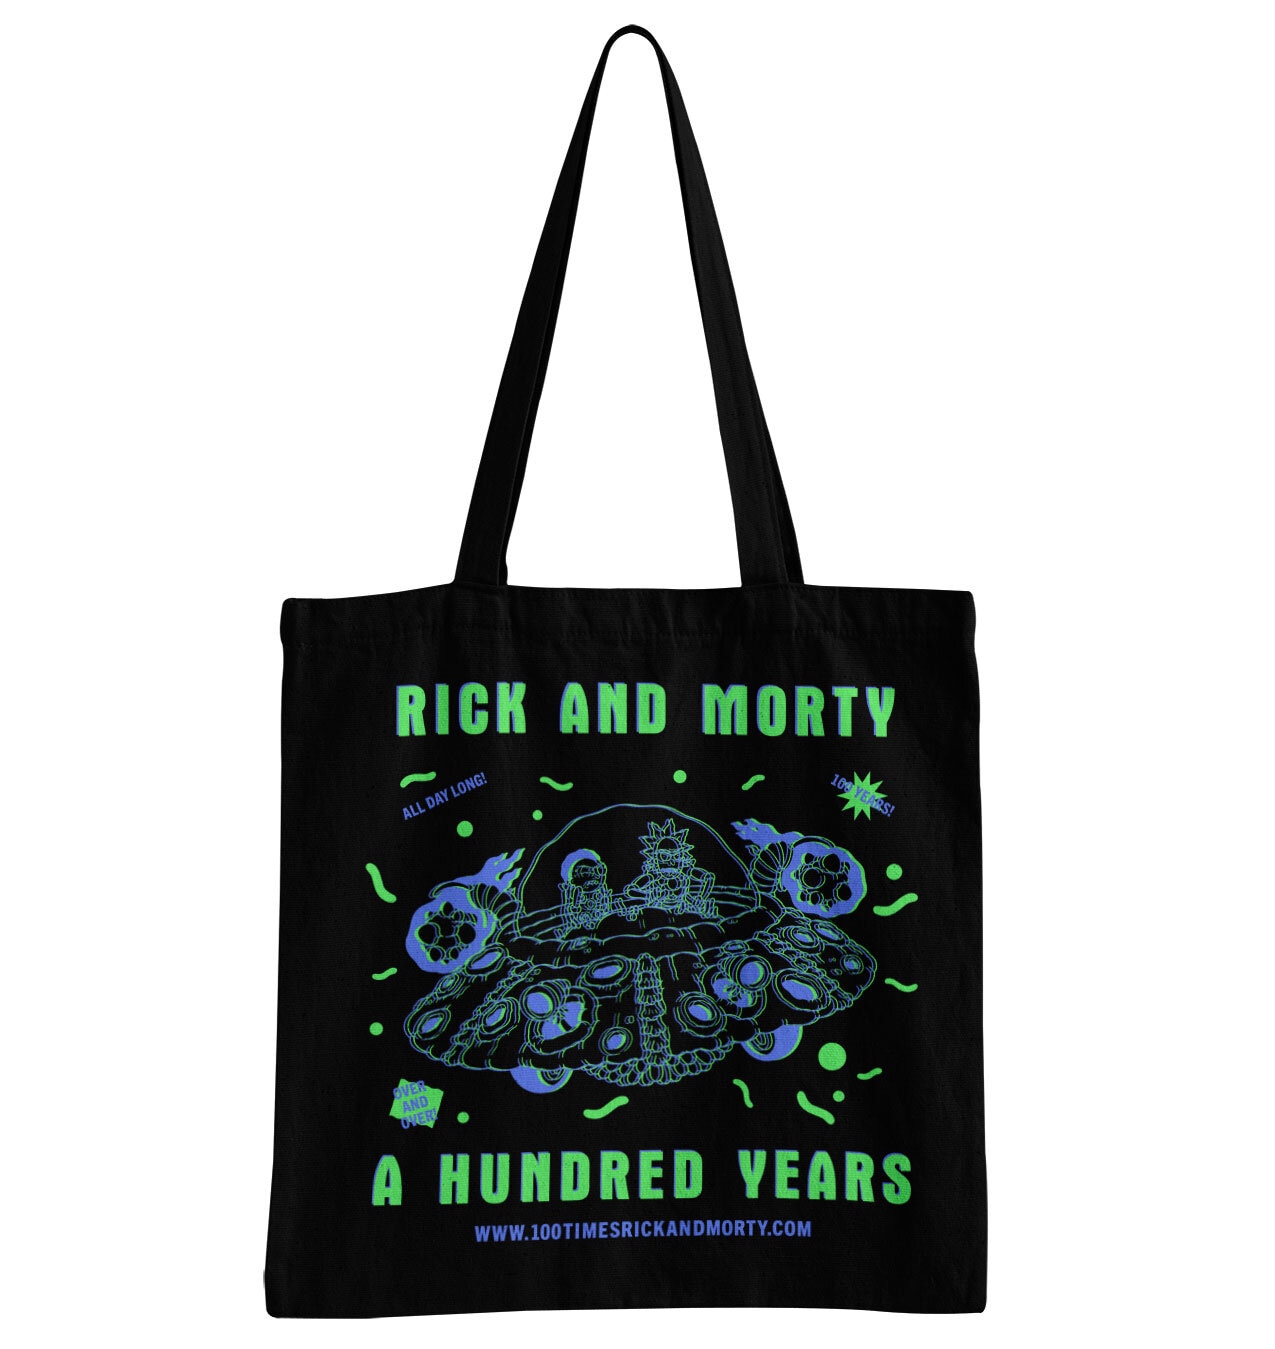 Rick And Morty - A Hundred Years Tote Bag